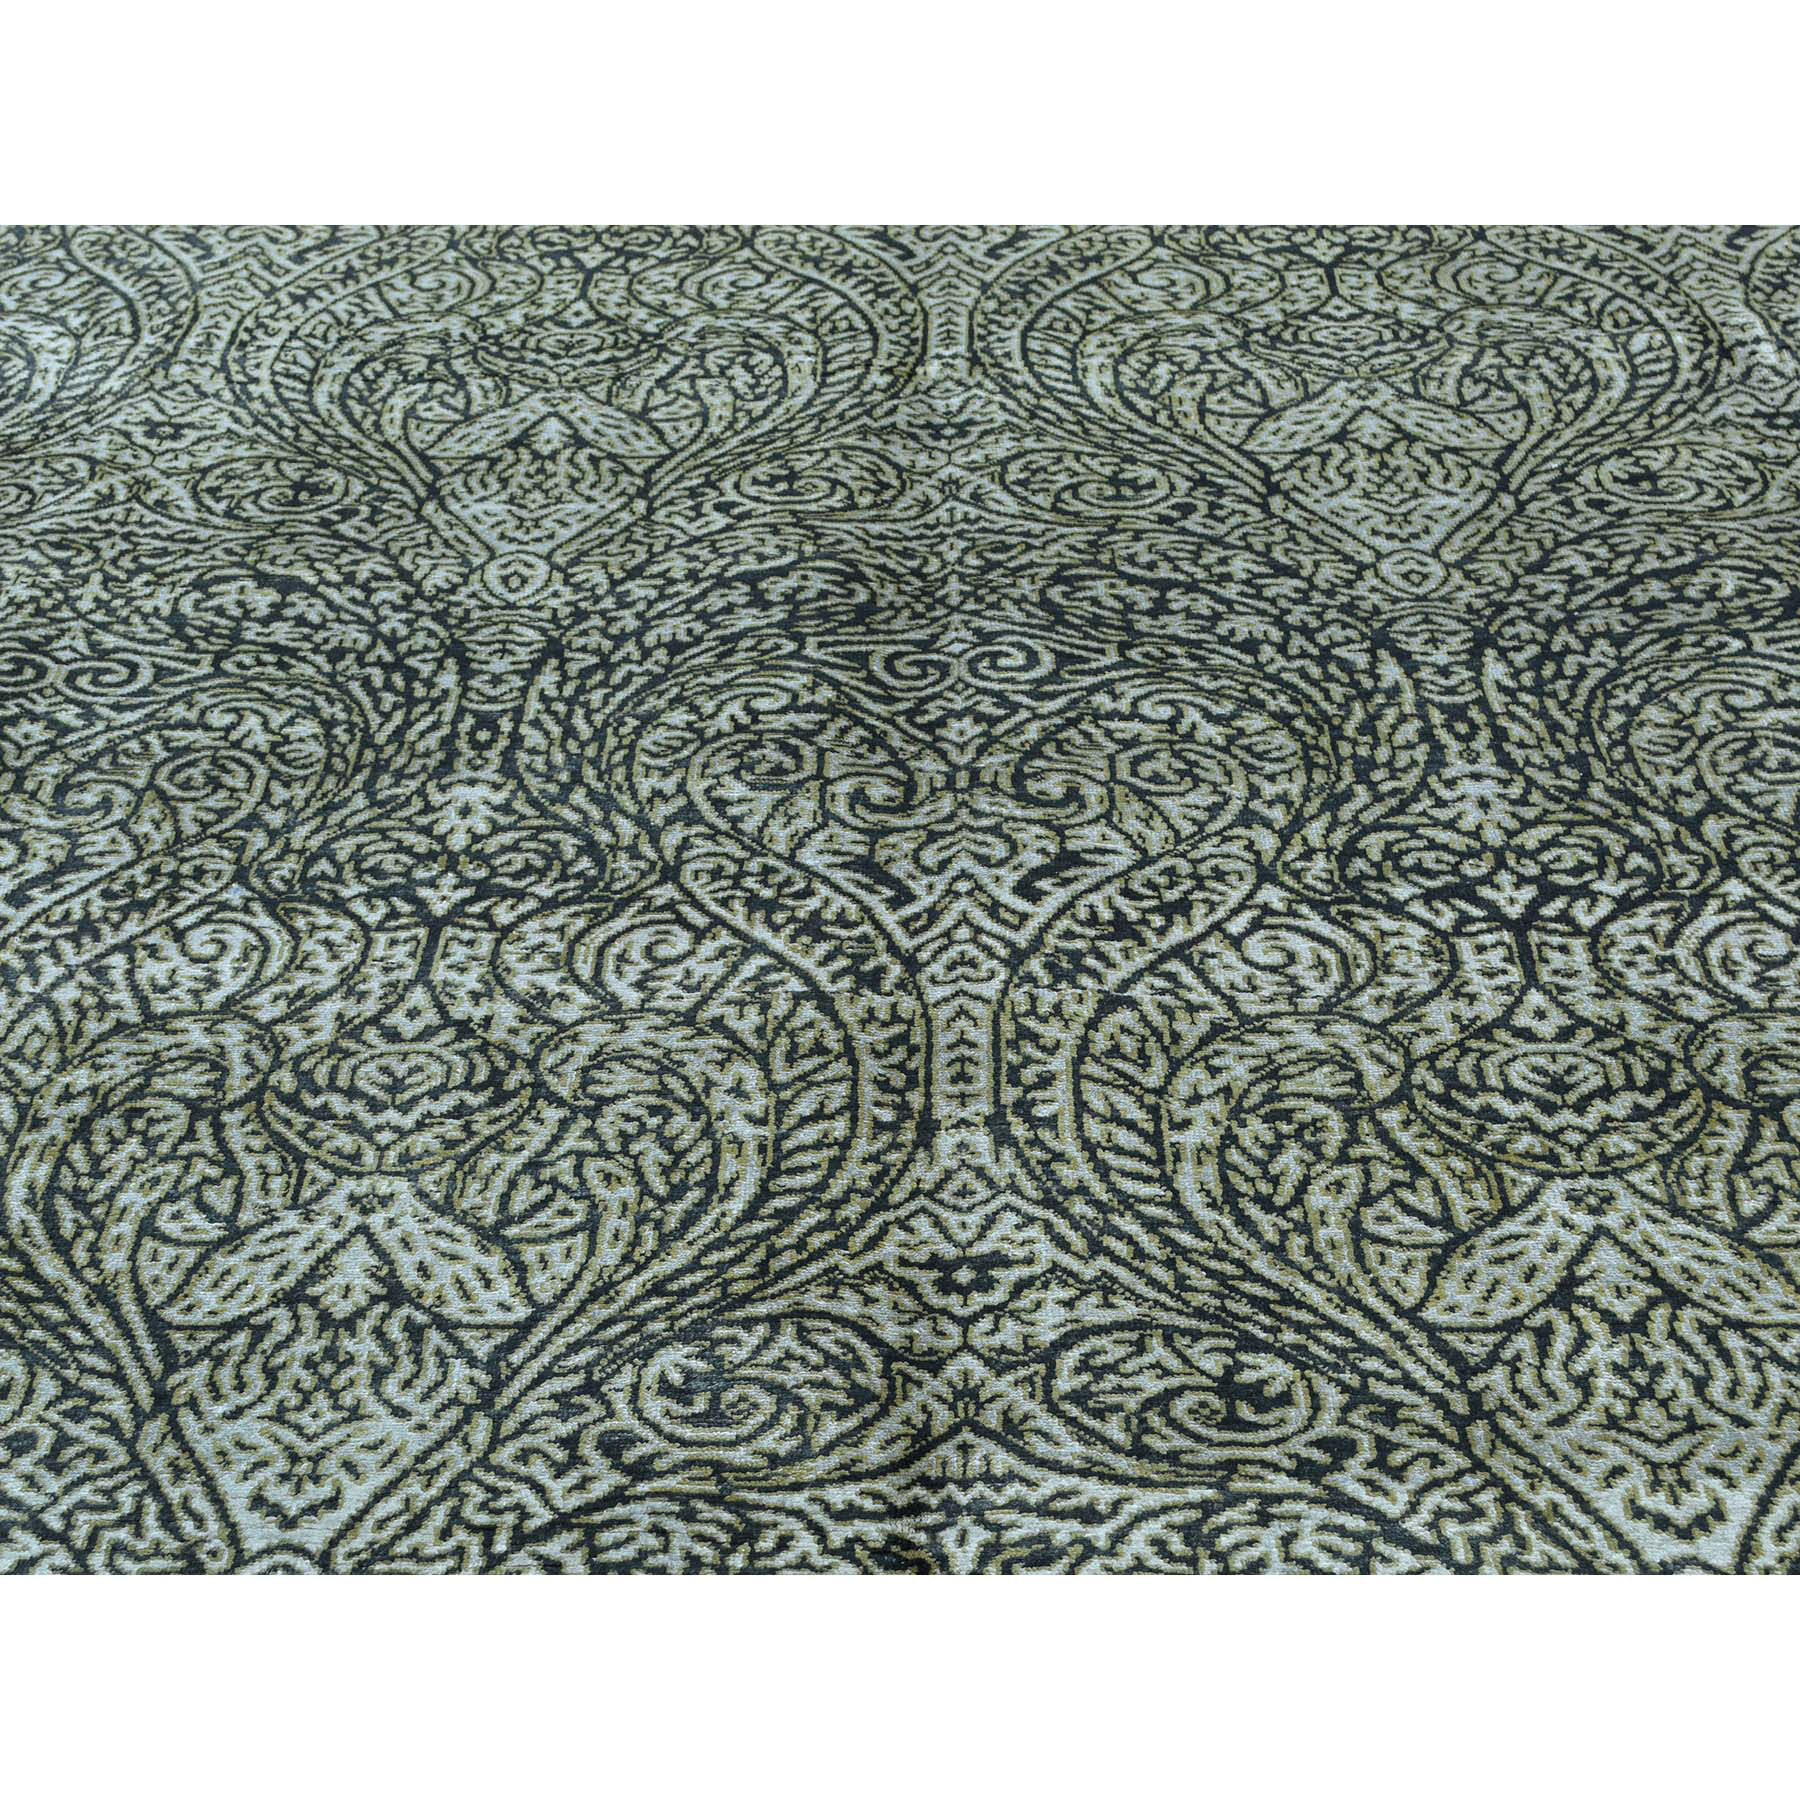 8-8 x12-3  Hand-Knotted Wool and Silk Tone on Tone Damask Design Rug 